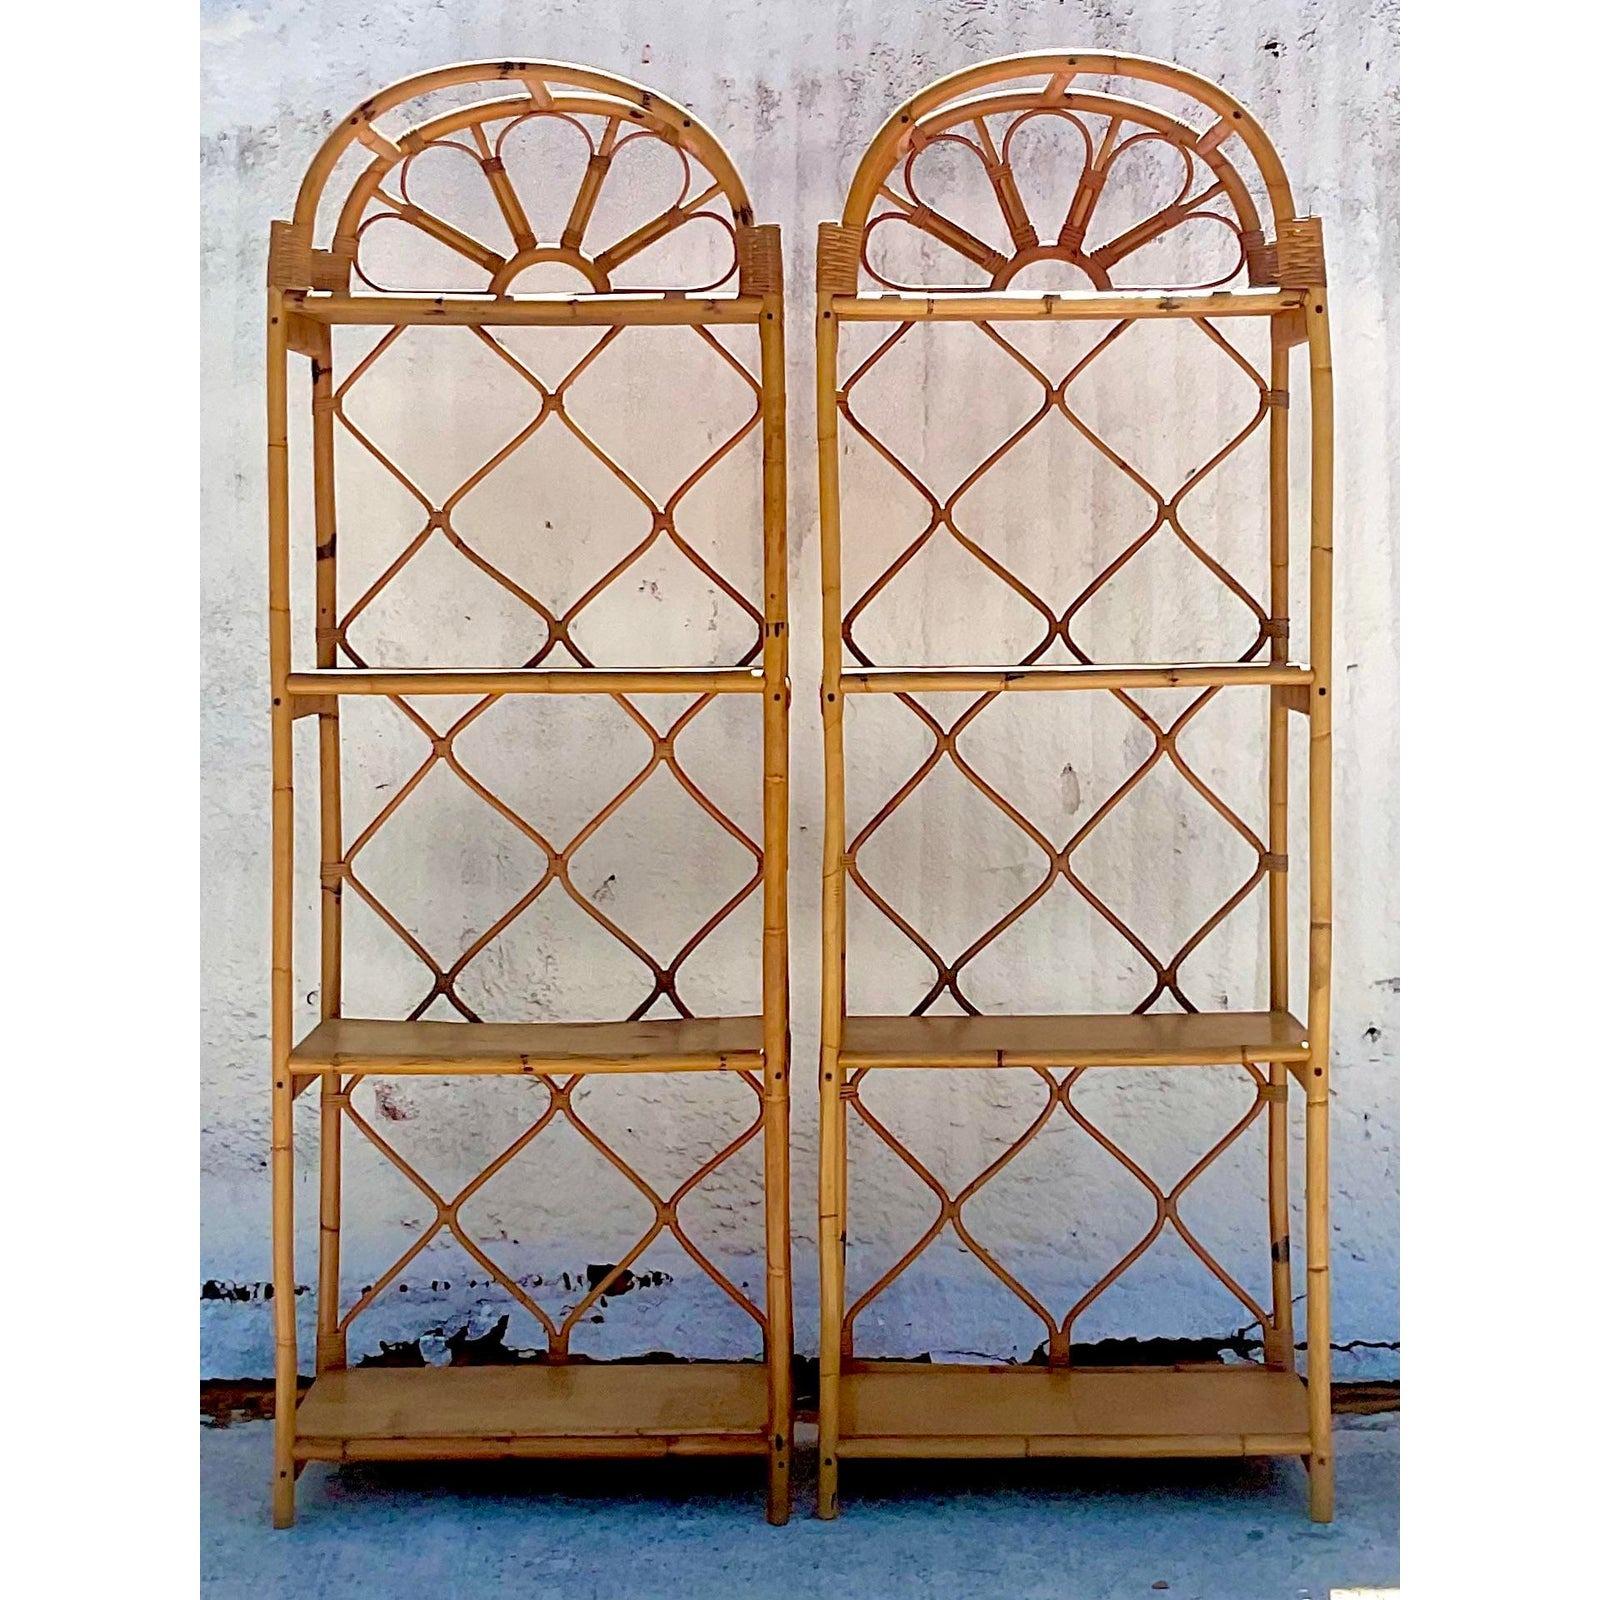 A fabulous pair of vintage Coastal etagere. Beautiful bent rattan in a chic arched design. Wooden shelves. Acquired from a Palm Beach estate.